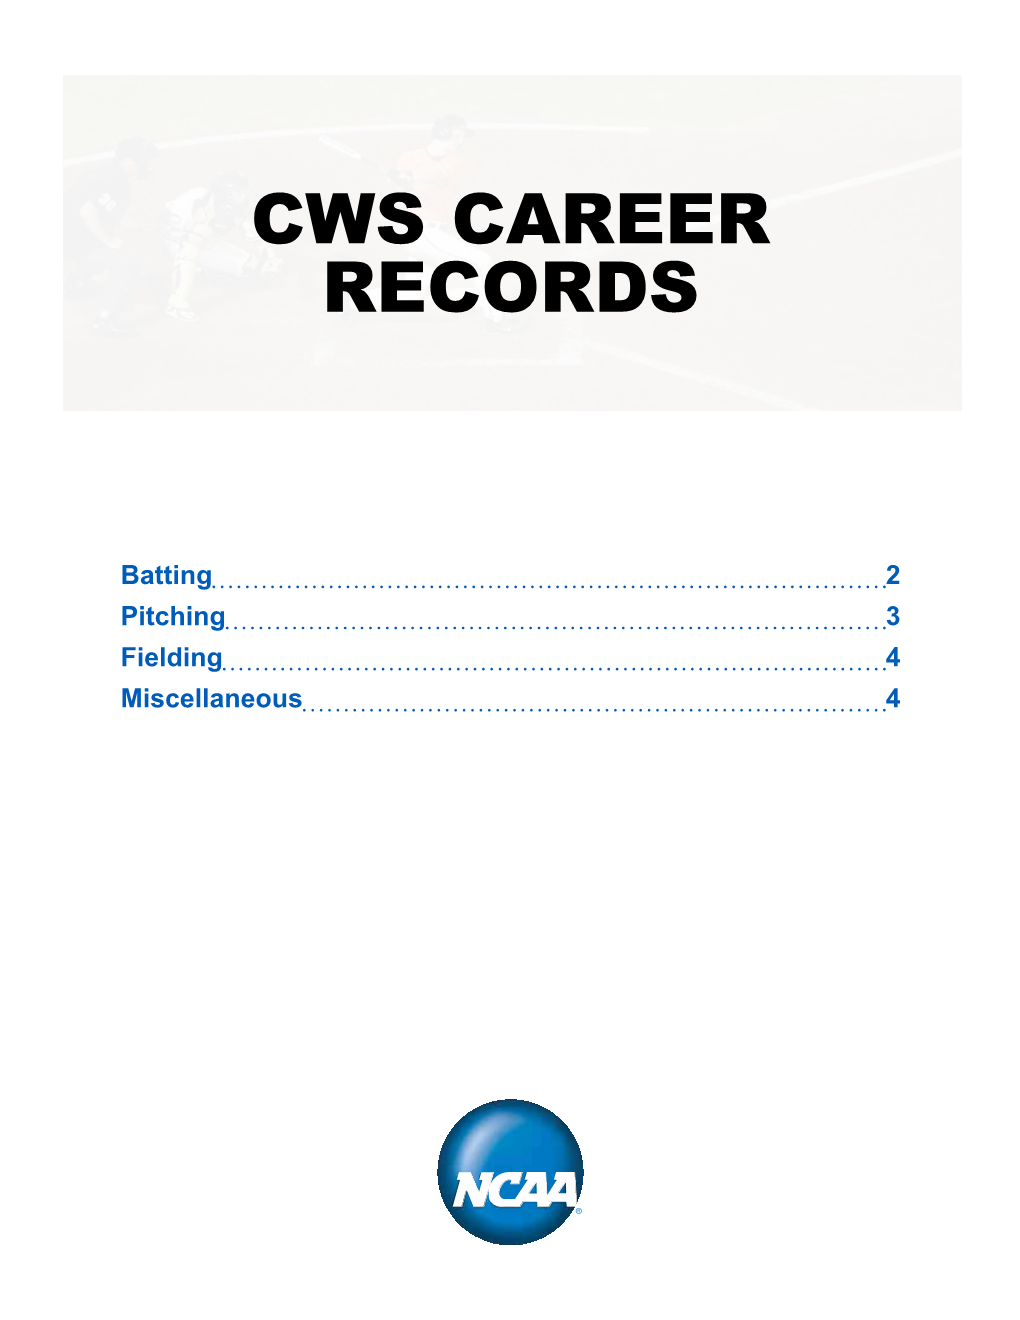 CWS Career Records